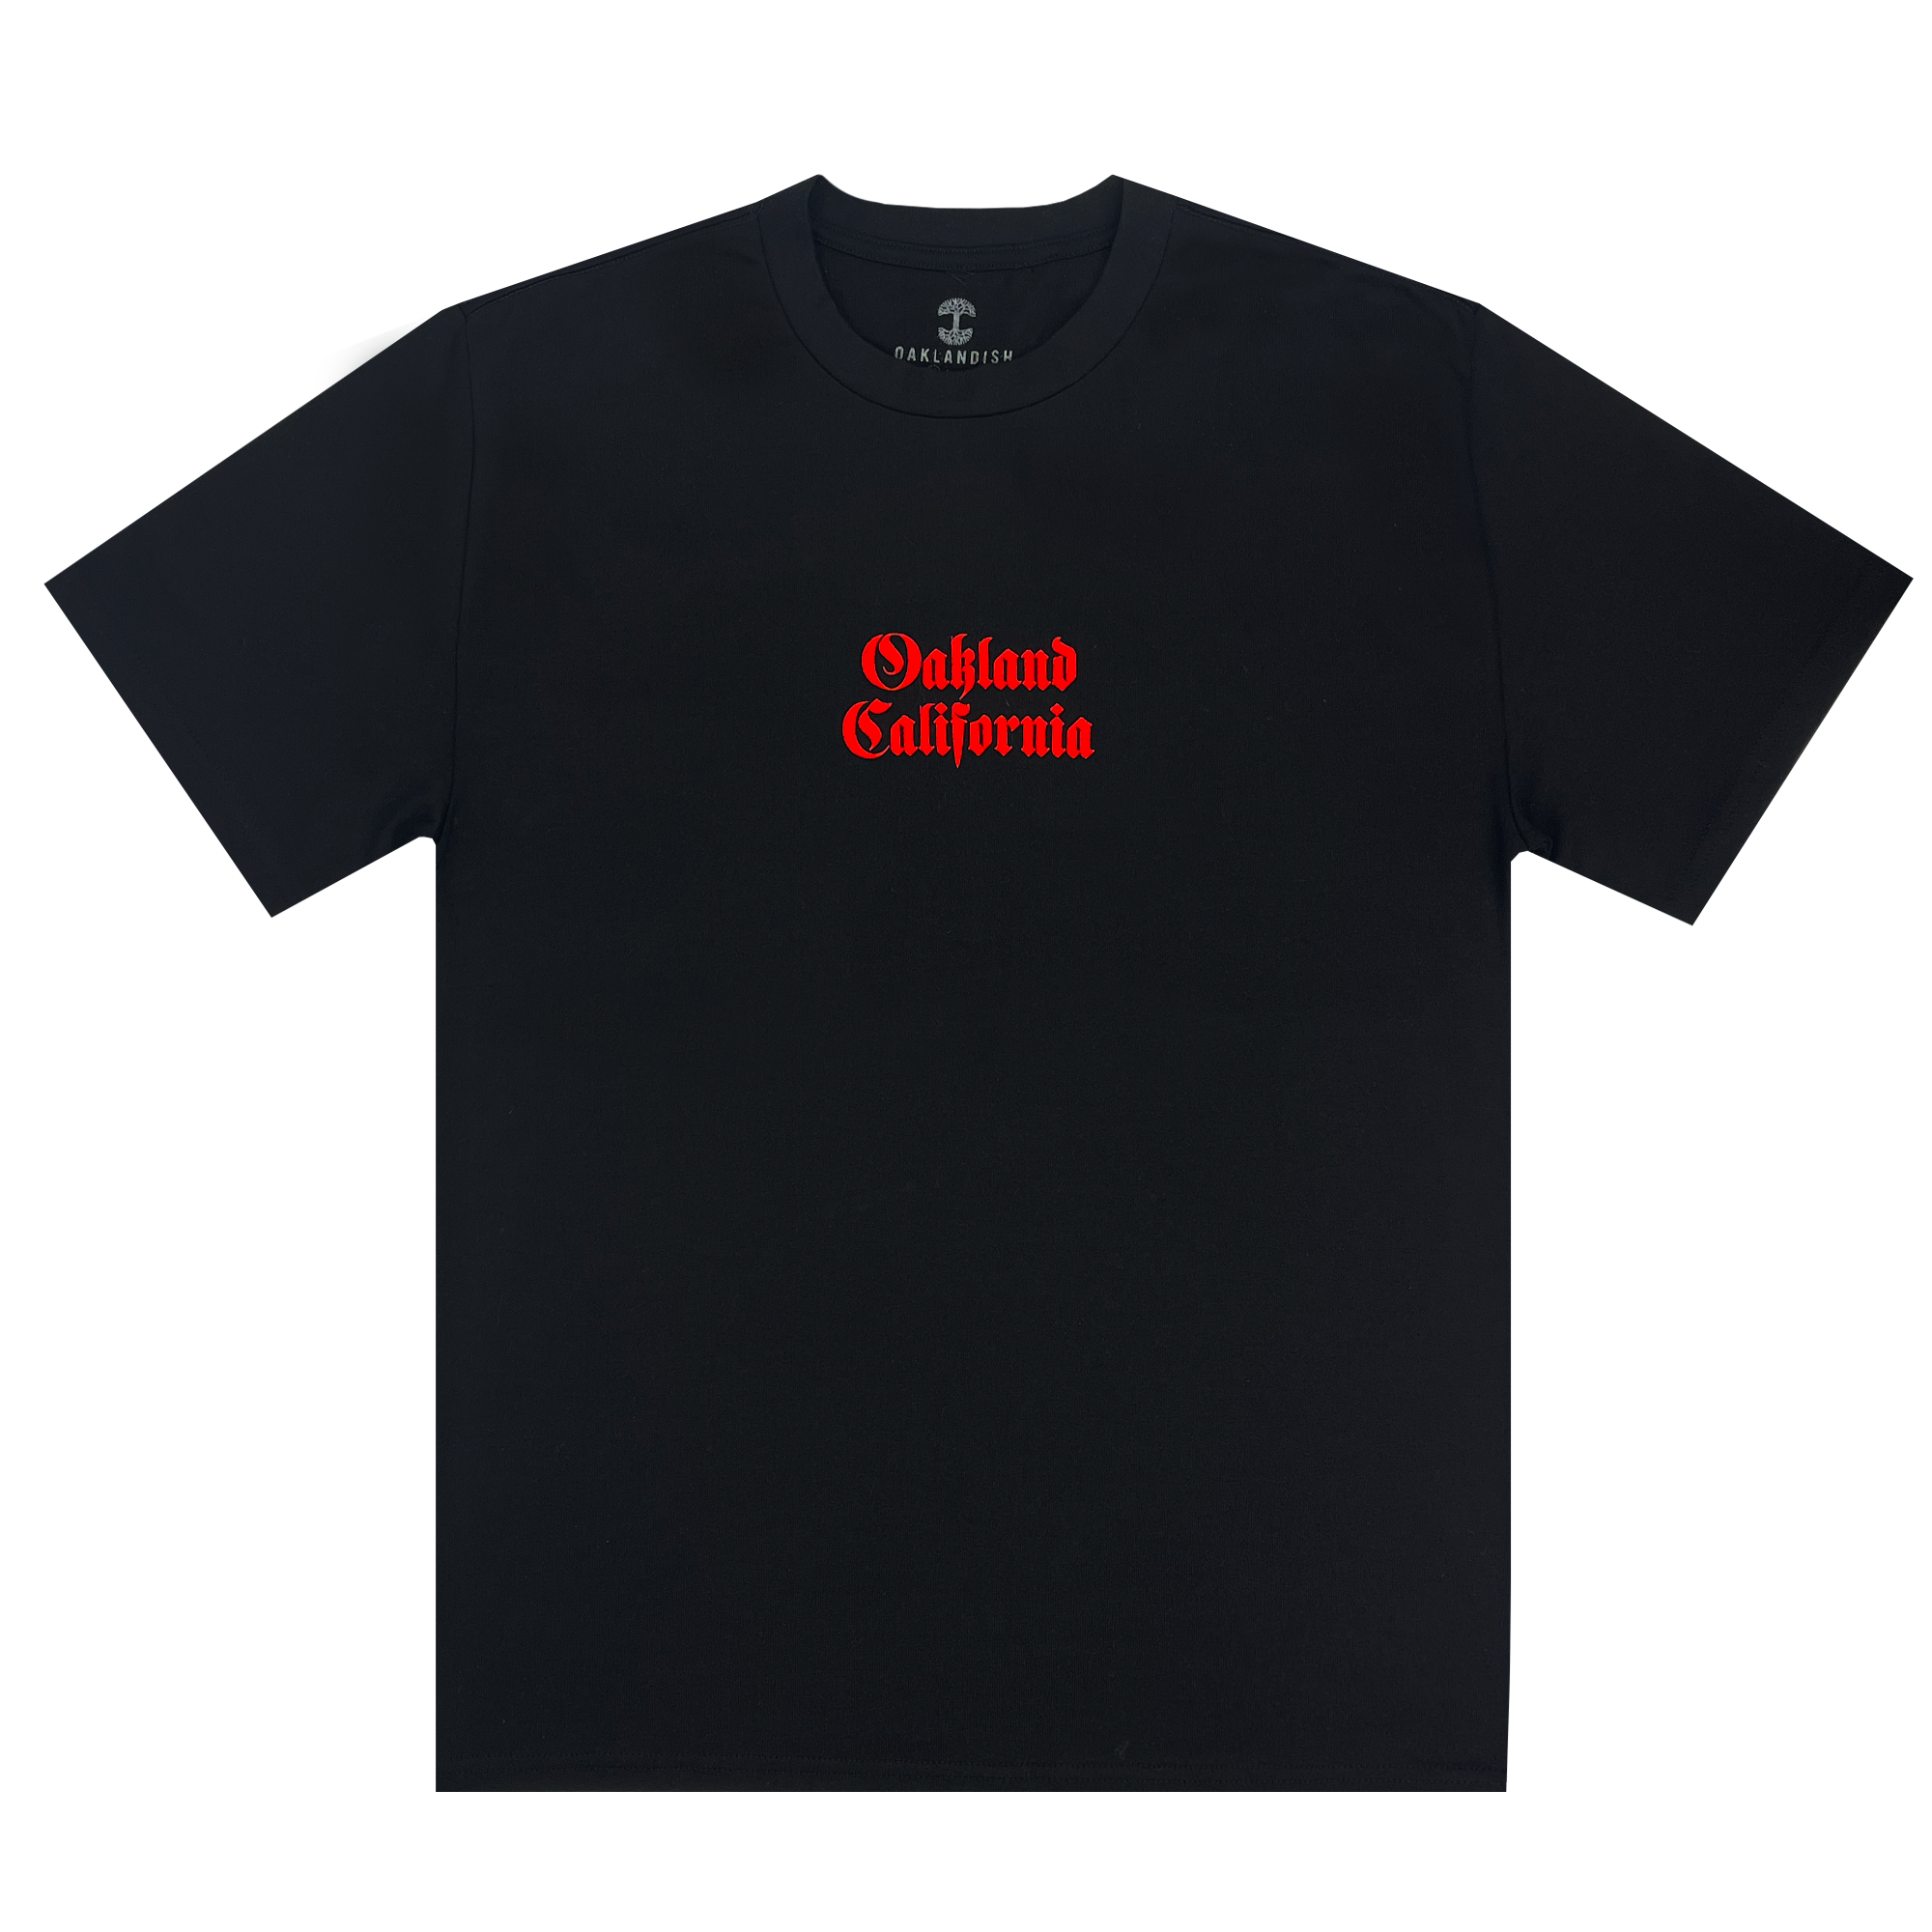 Front view of  black tee with Oakland California printed centered in red ink.